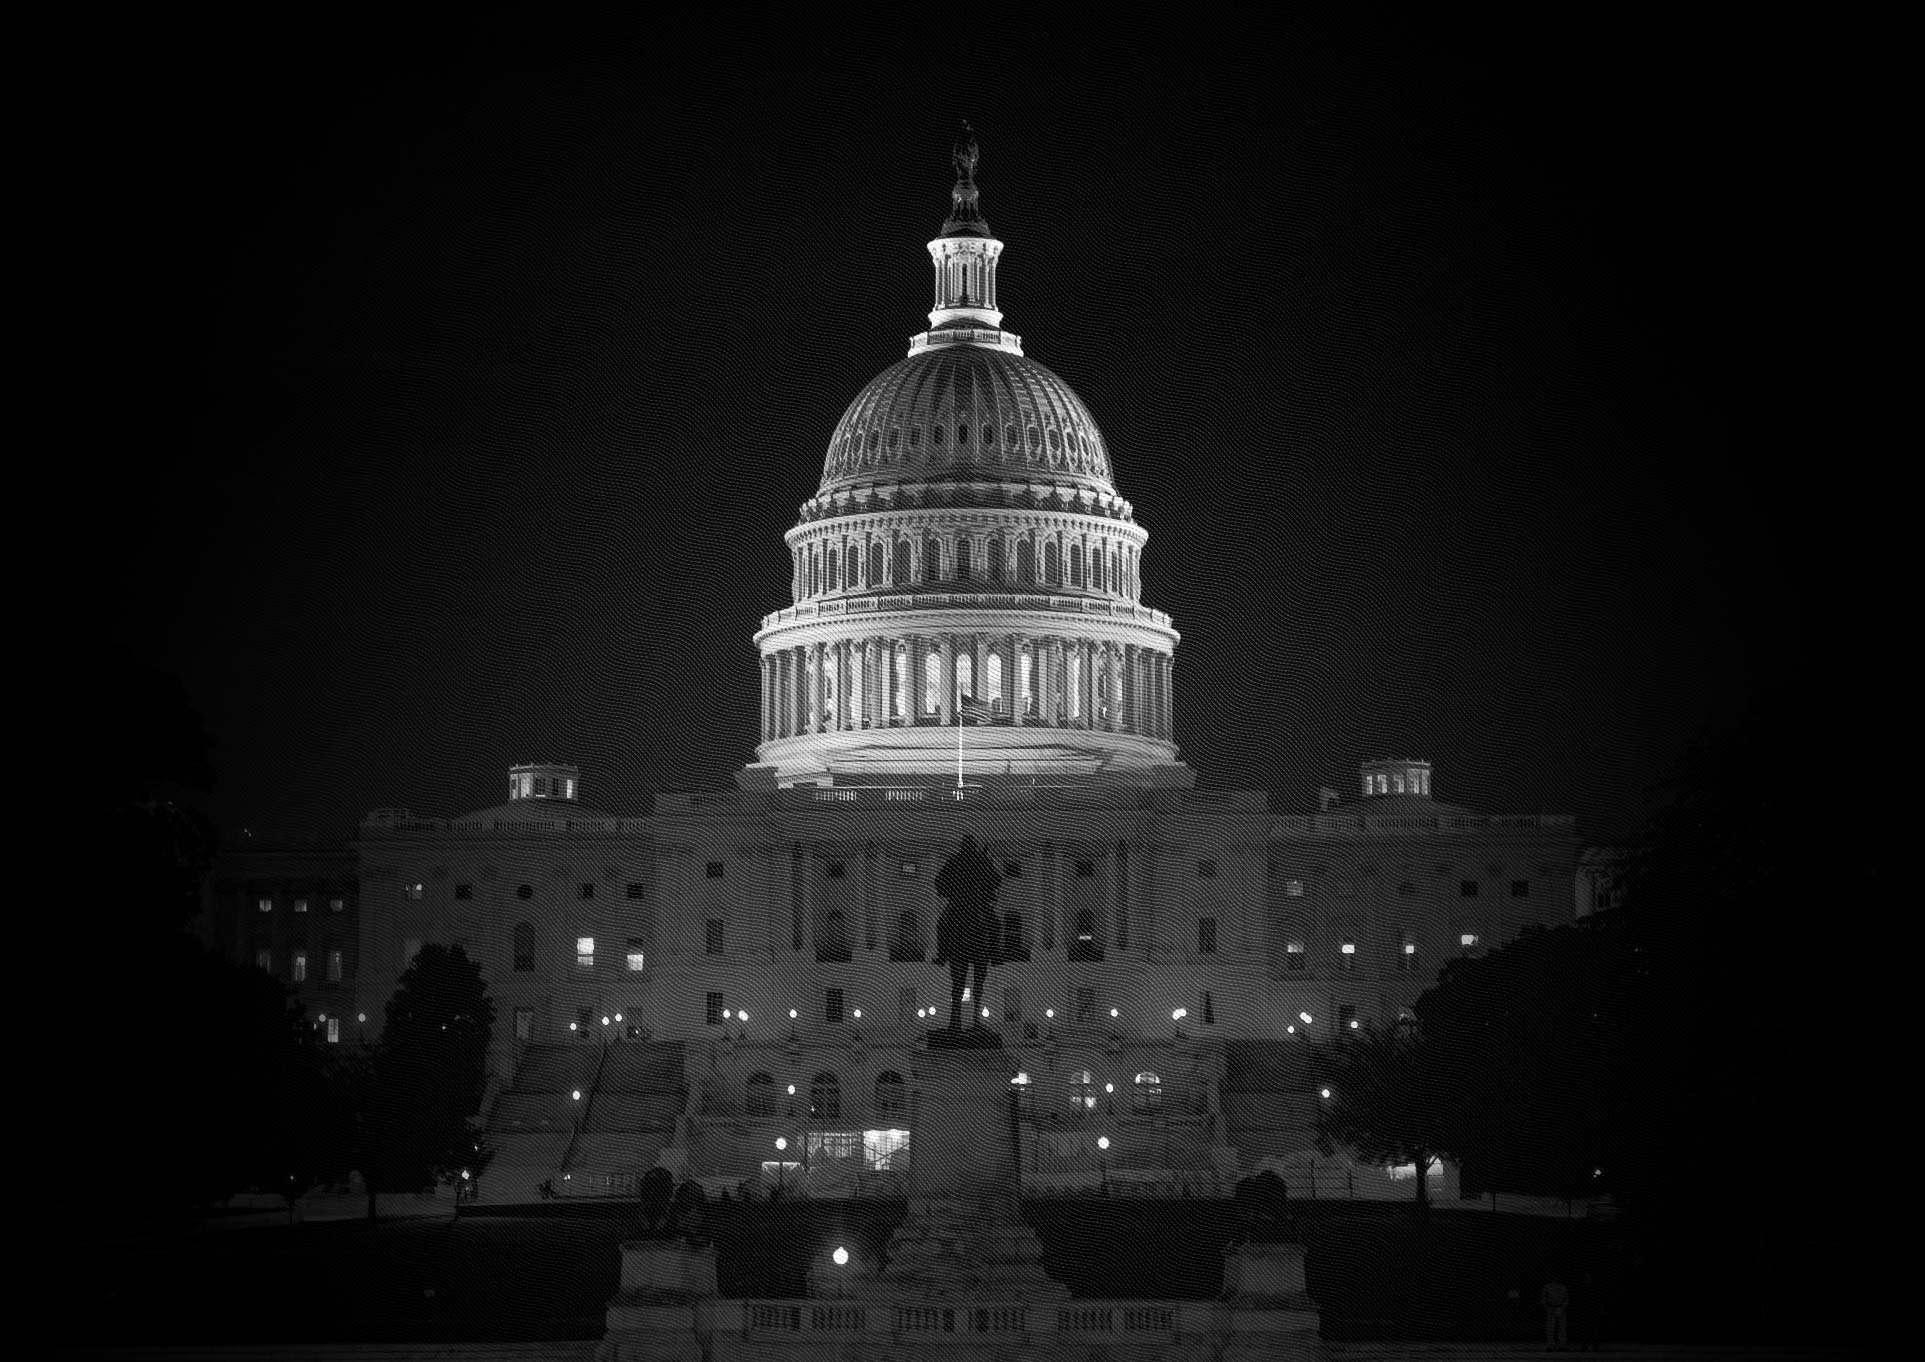 Image of the US Capital Building